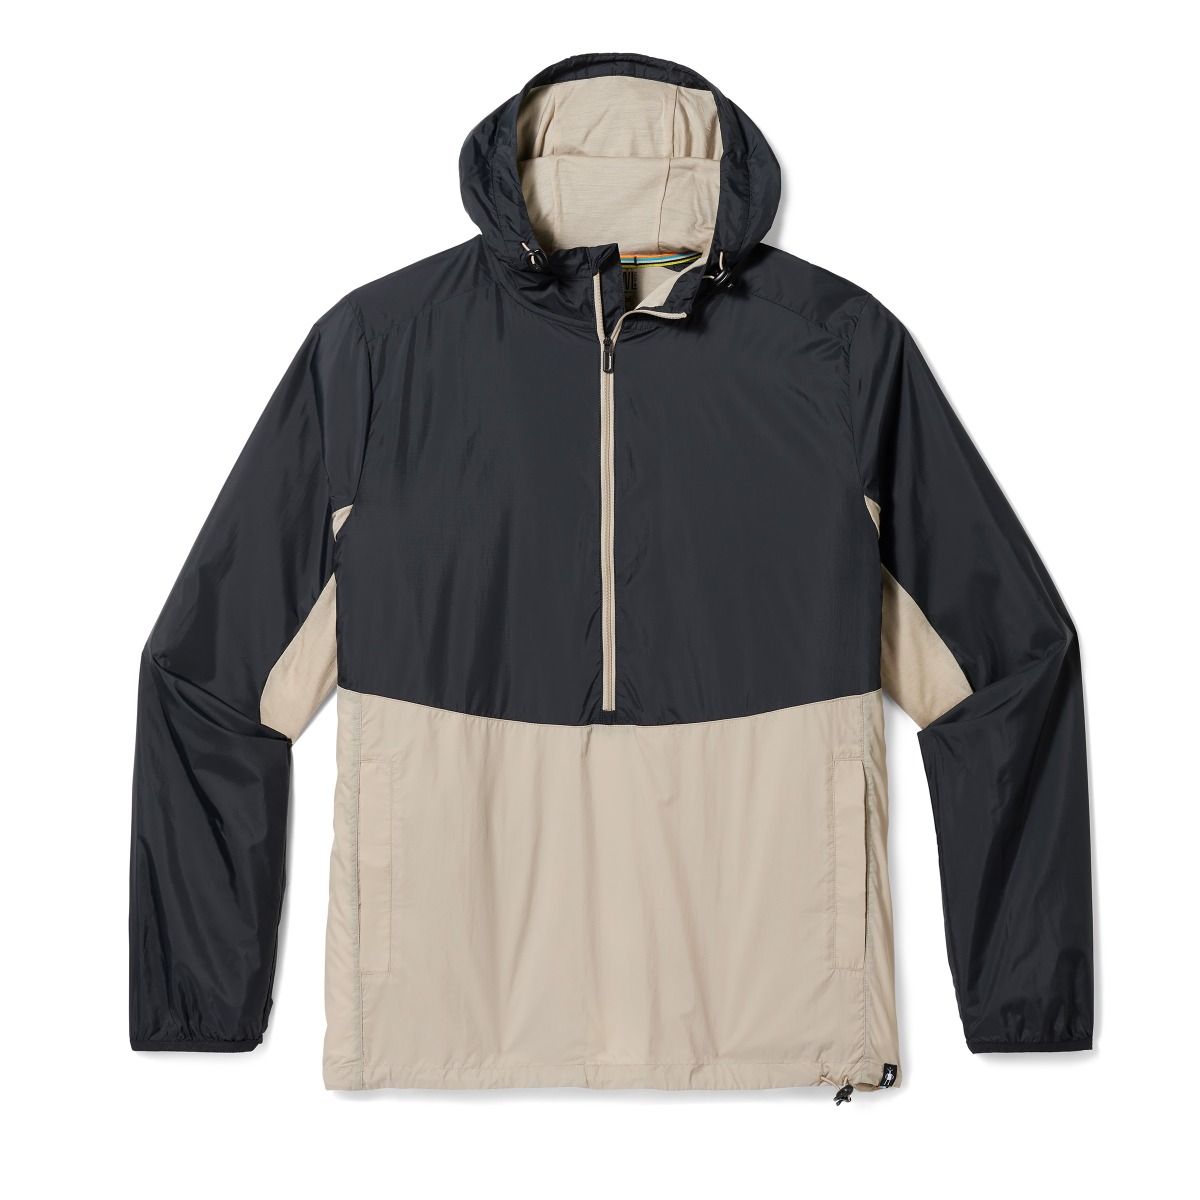 Merino Sport Ultra Light Jacket Mn - The Benchmark Outdoor Outfitters